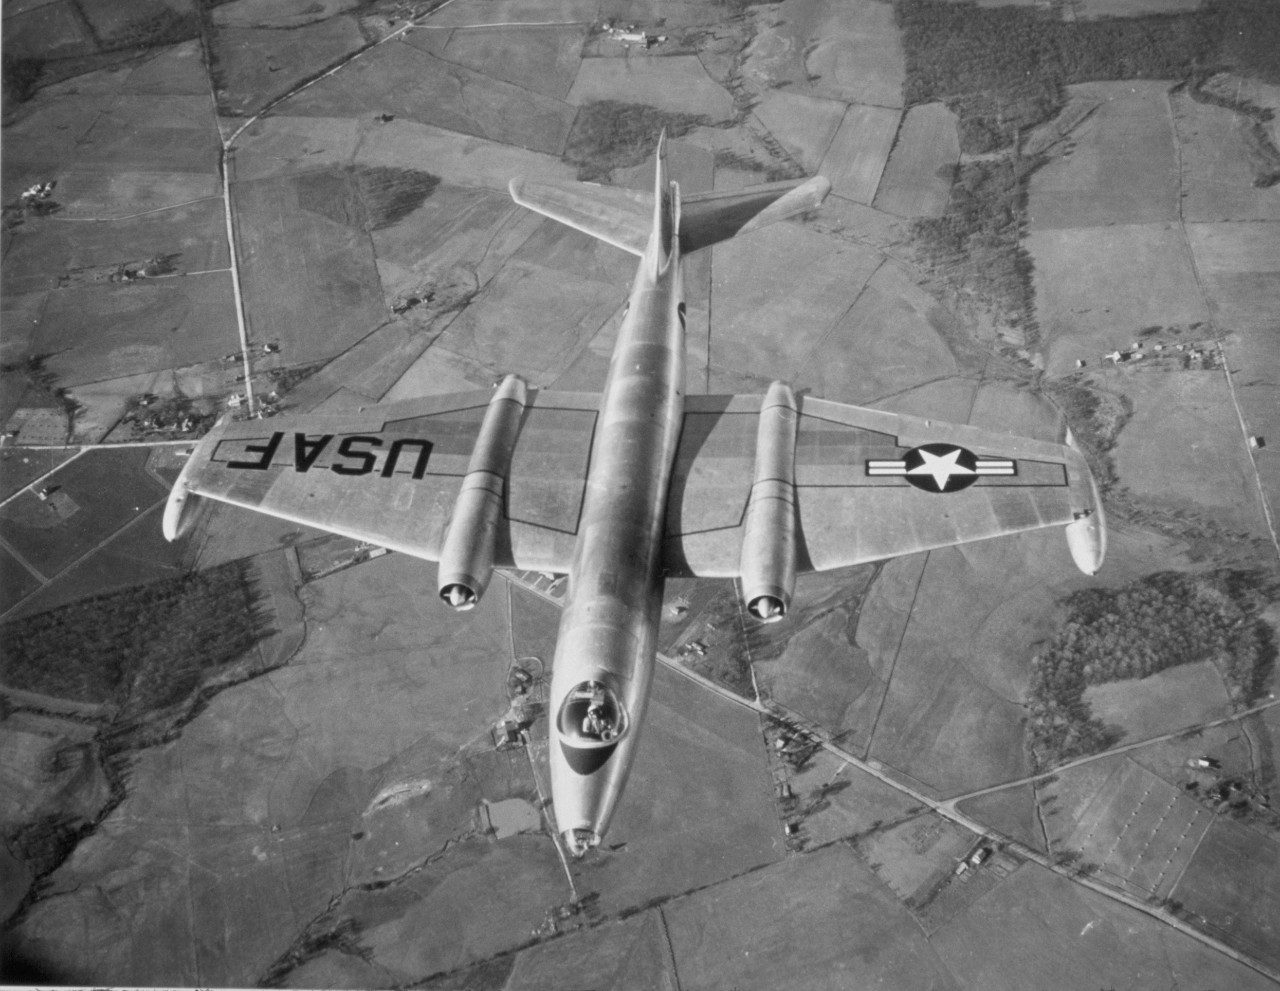 The sixth B-57A Canberra in flight with wingtip fuel tanks. Other than using American-built engines and US Air Force instruments and systems, the B-57As differed little from the Royal Air Force (RAF) Canberras.